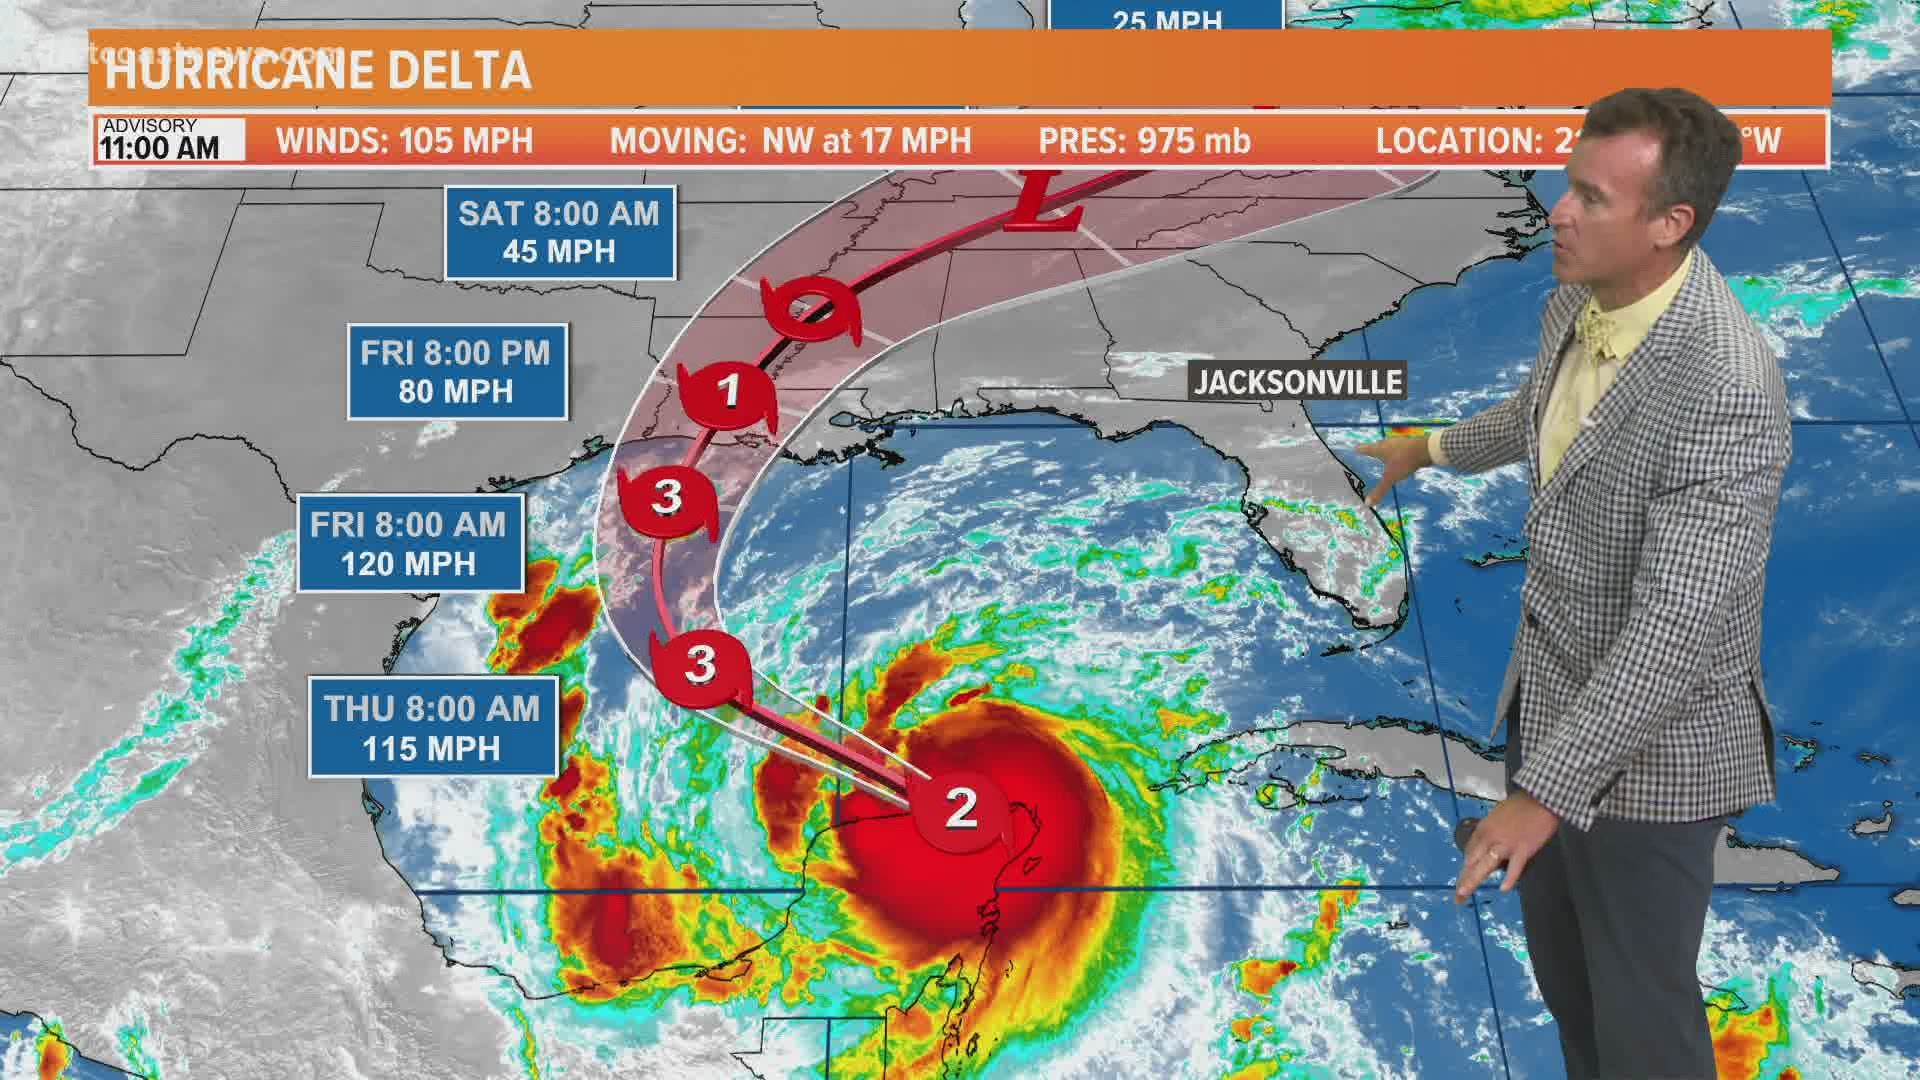 Hurricane Delta made landfall in Louisiana Wednesday morning with 110 mile-per-hour winds.